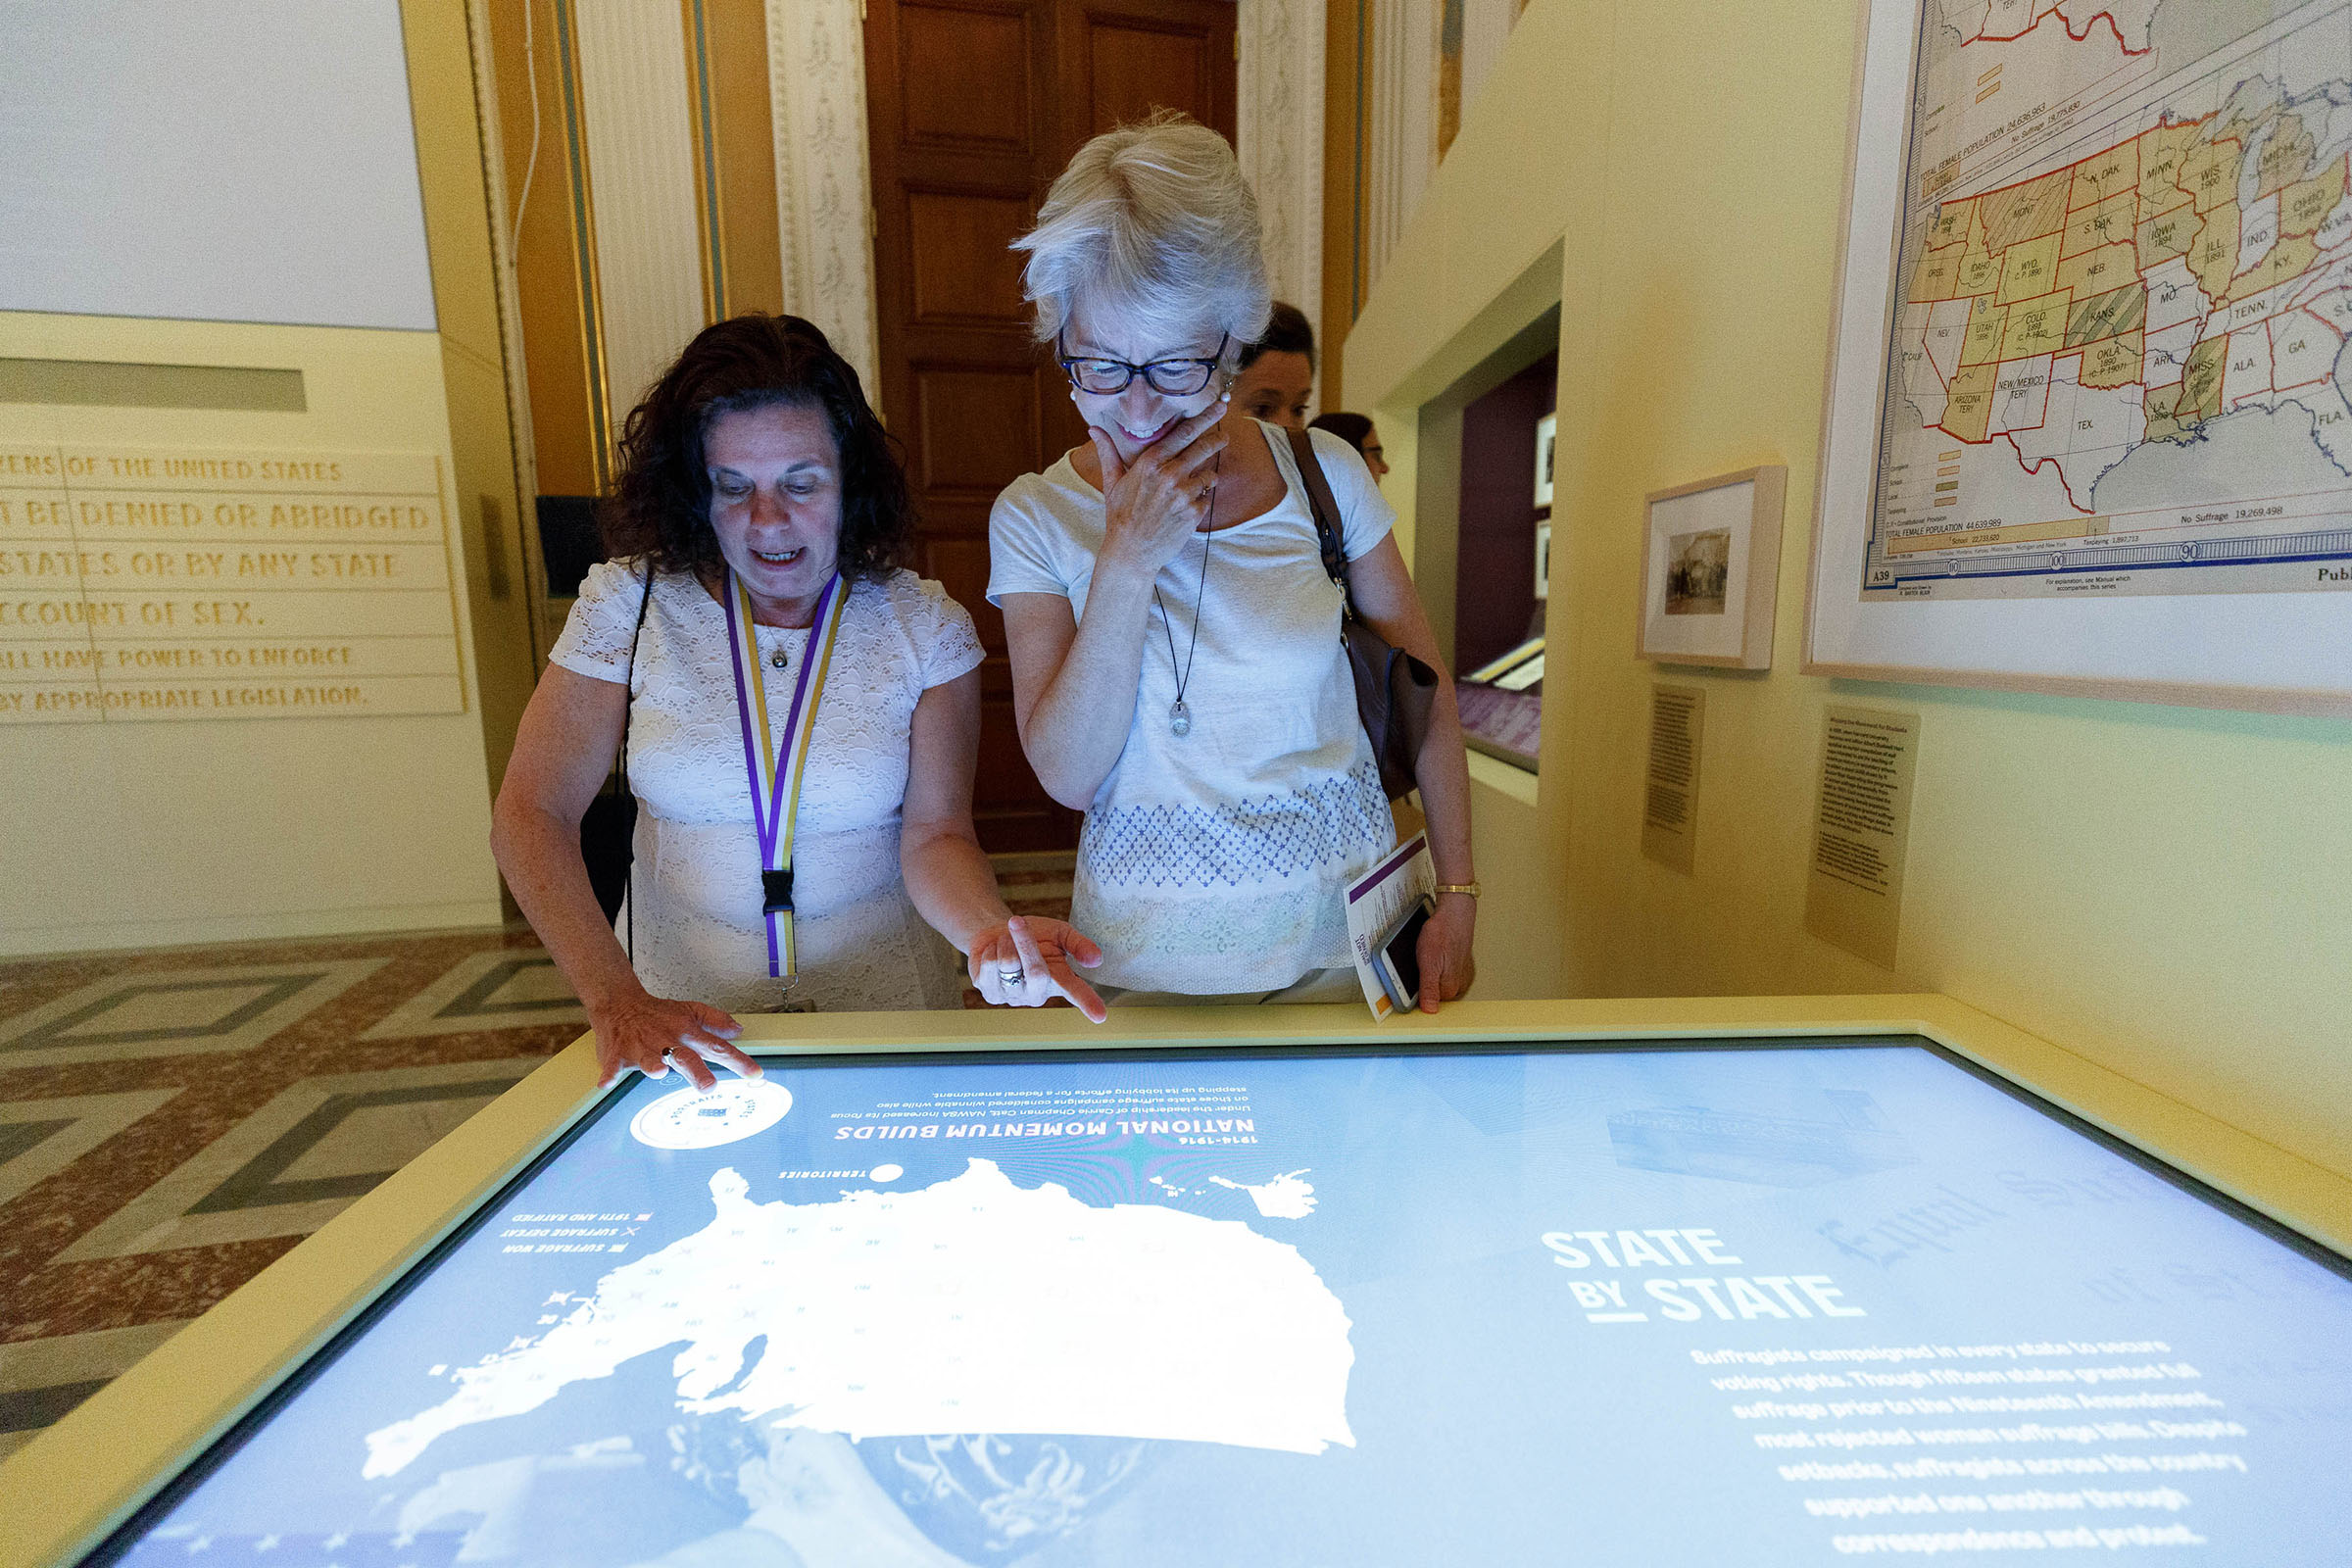 Shall Not Be Denied Exhibition Opening. Visitors use a digital interactive table to explore the contributions of suffragists from all 50 states. (Upswell designed the user interaction and worked with the LOC team to organize the content.)